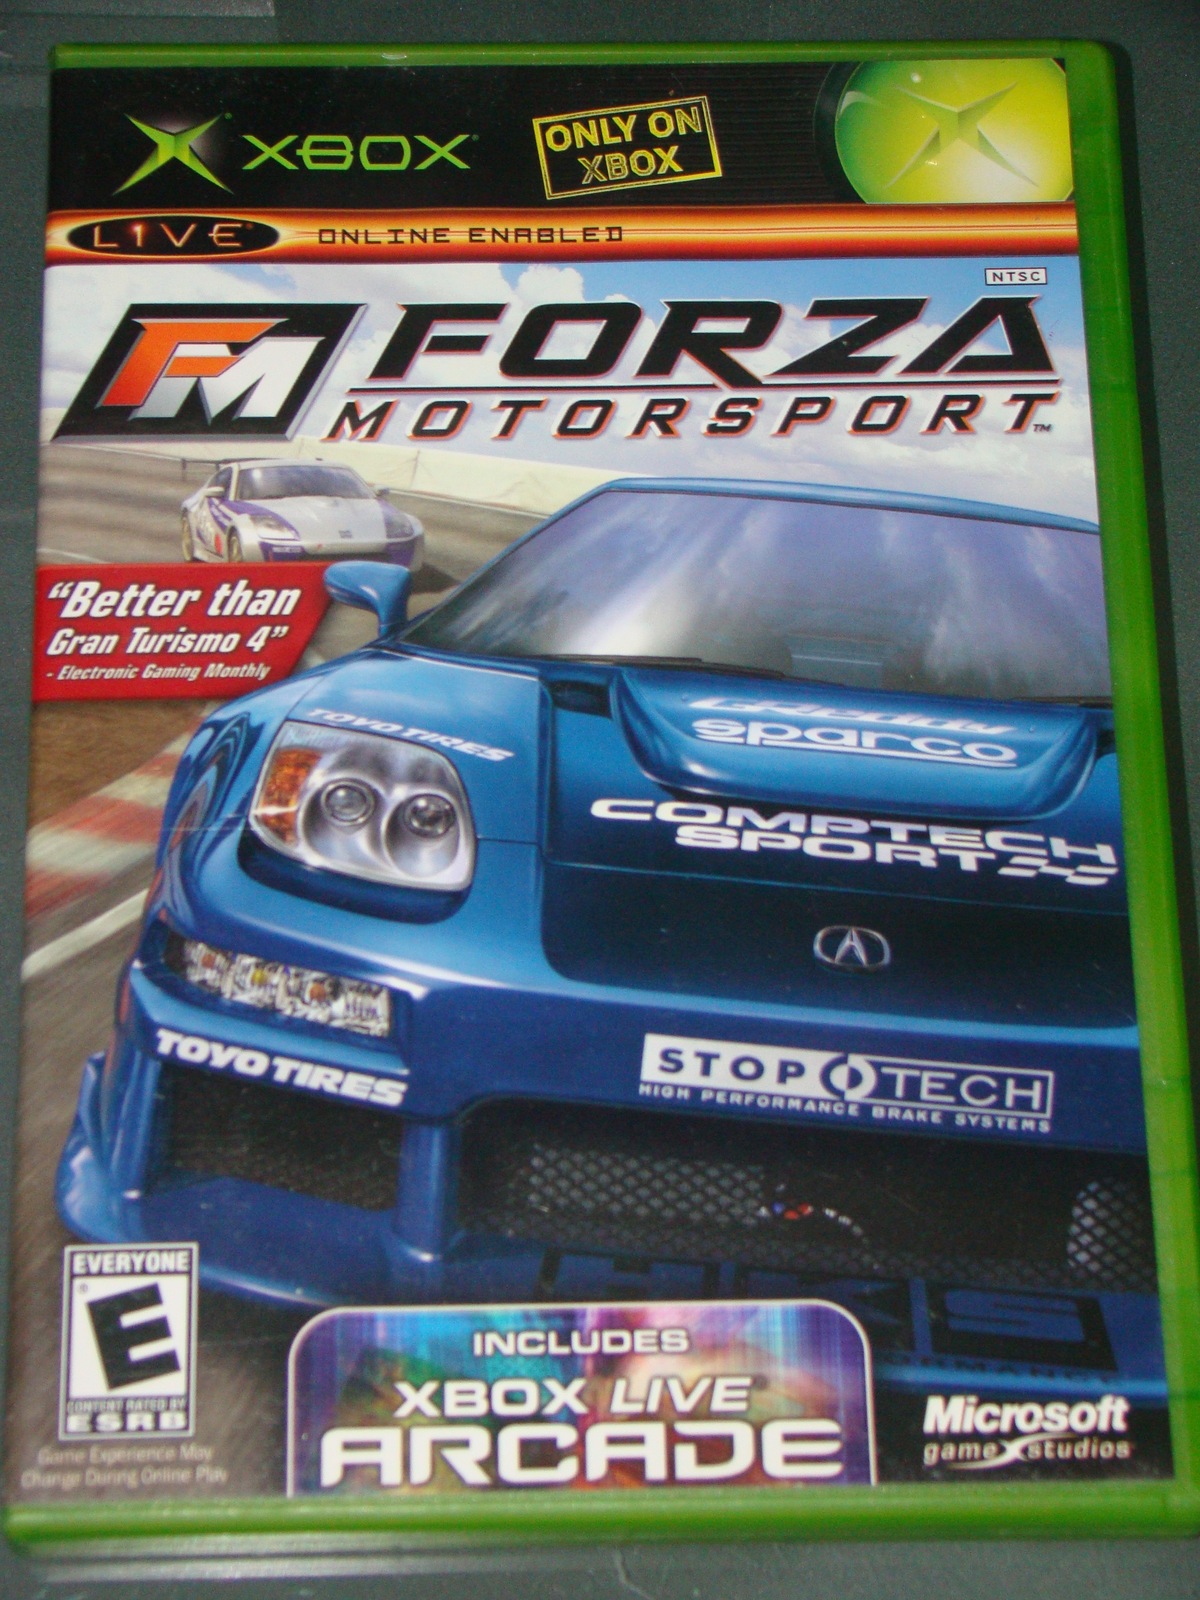 Primary image for XBOX - FORZA MOTORSPORT (Complete with Instructions)